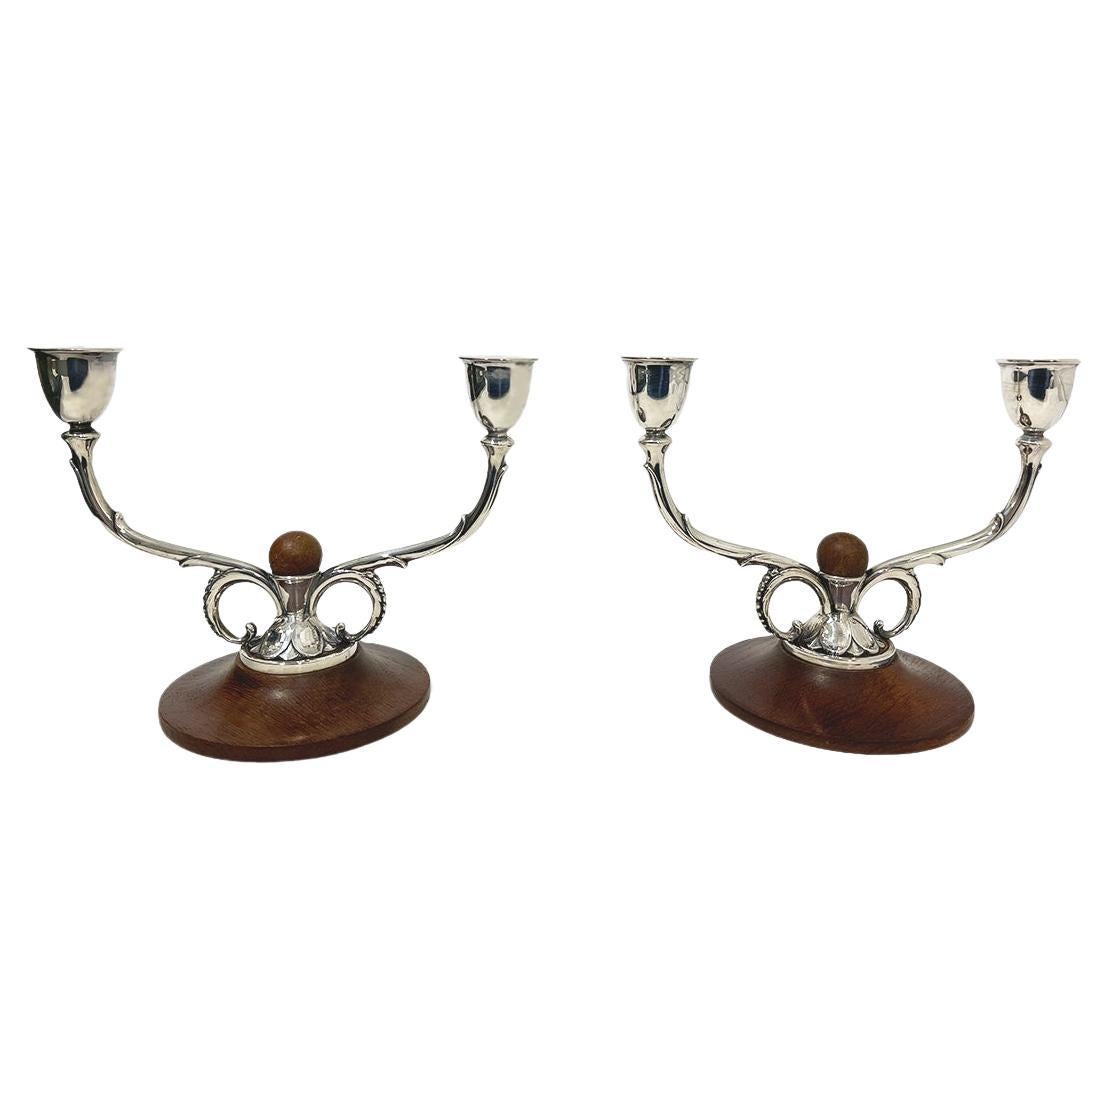 Danish Silver Two Light Candelabras, by A. Dragsted for Johannes Siggaard, 1943 For Sale